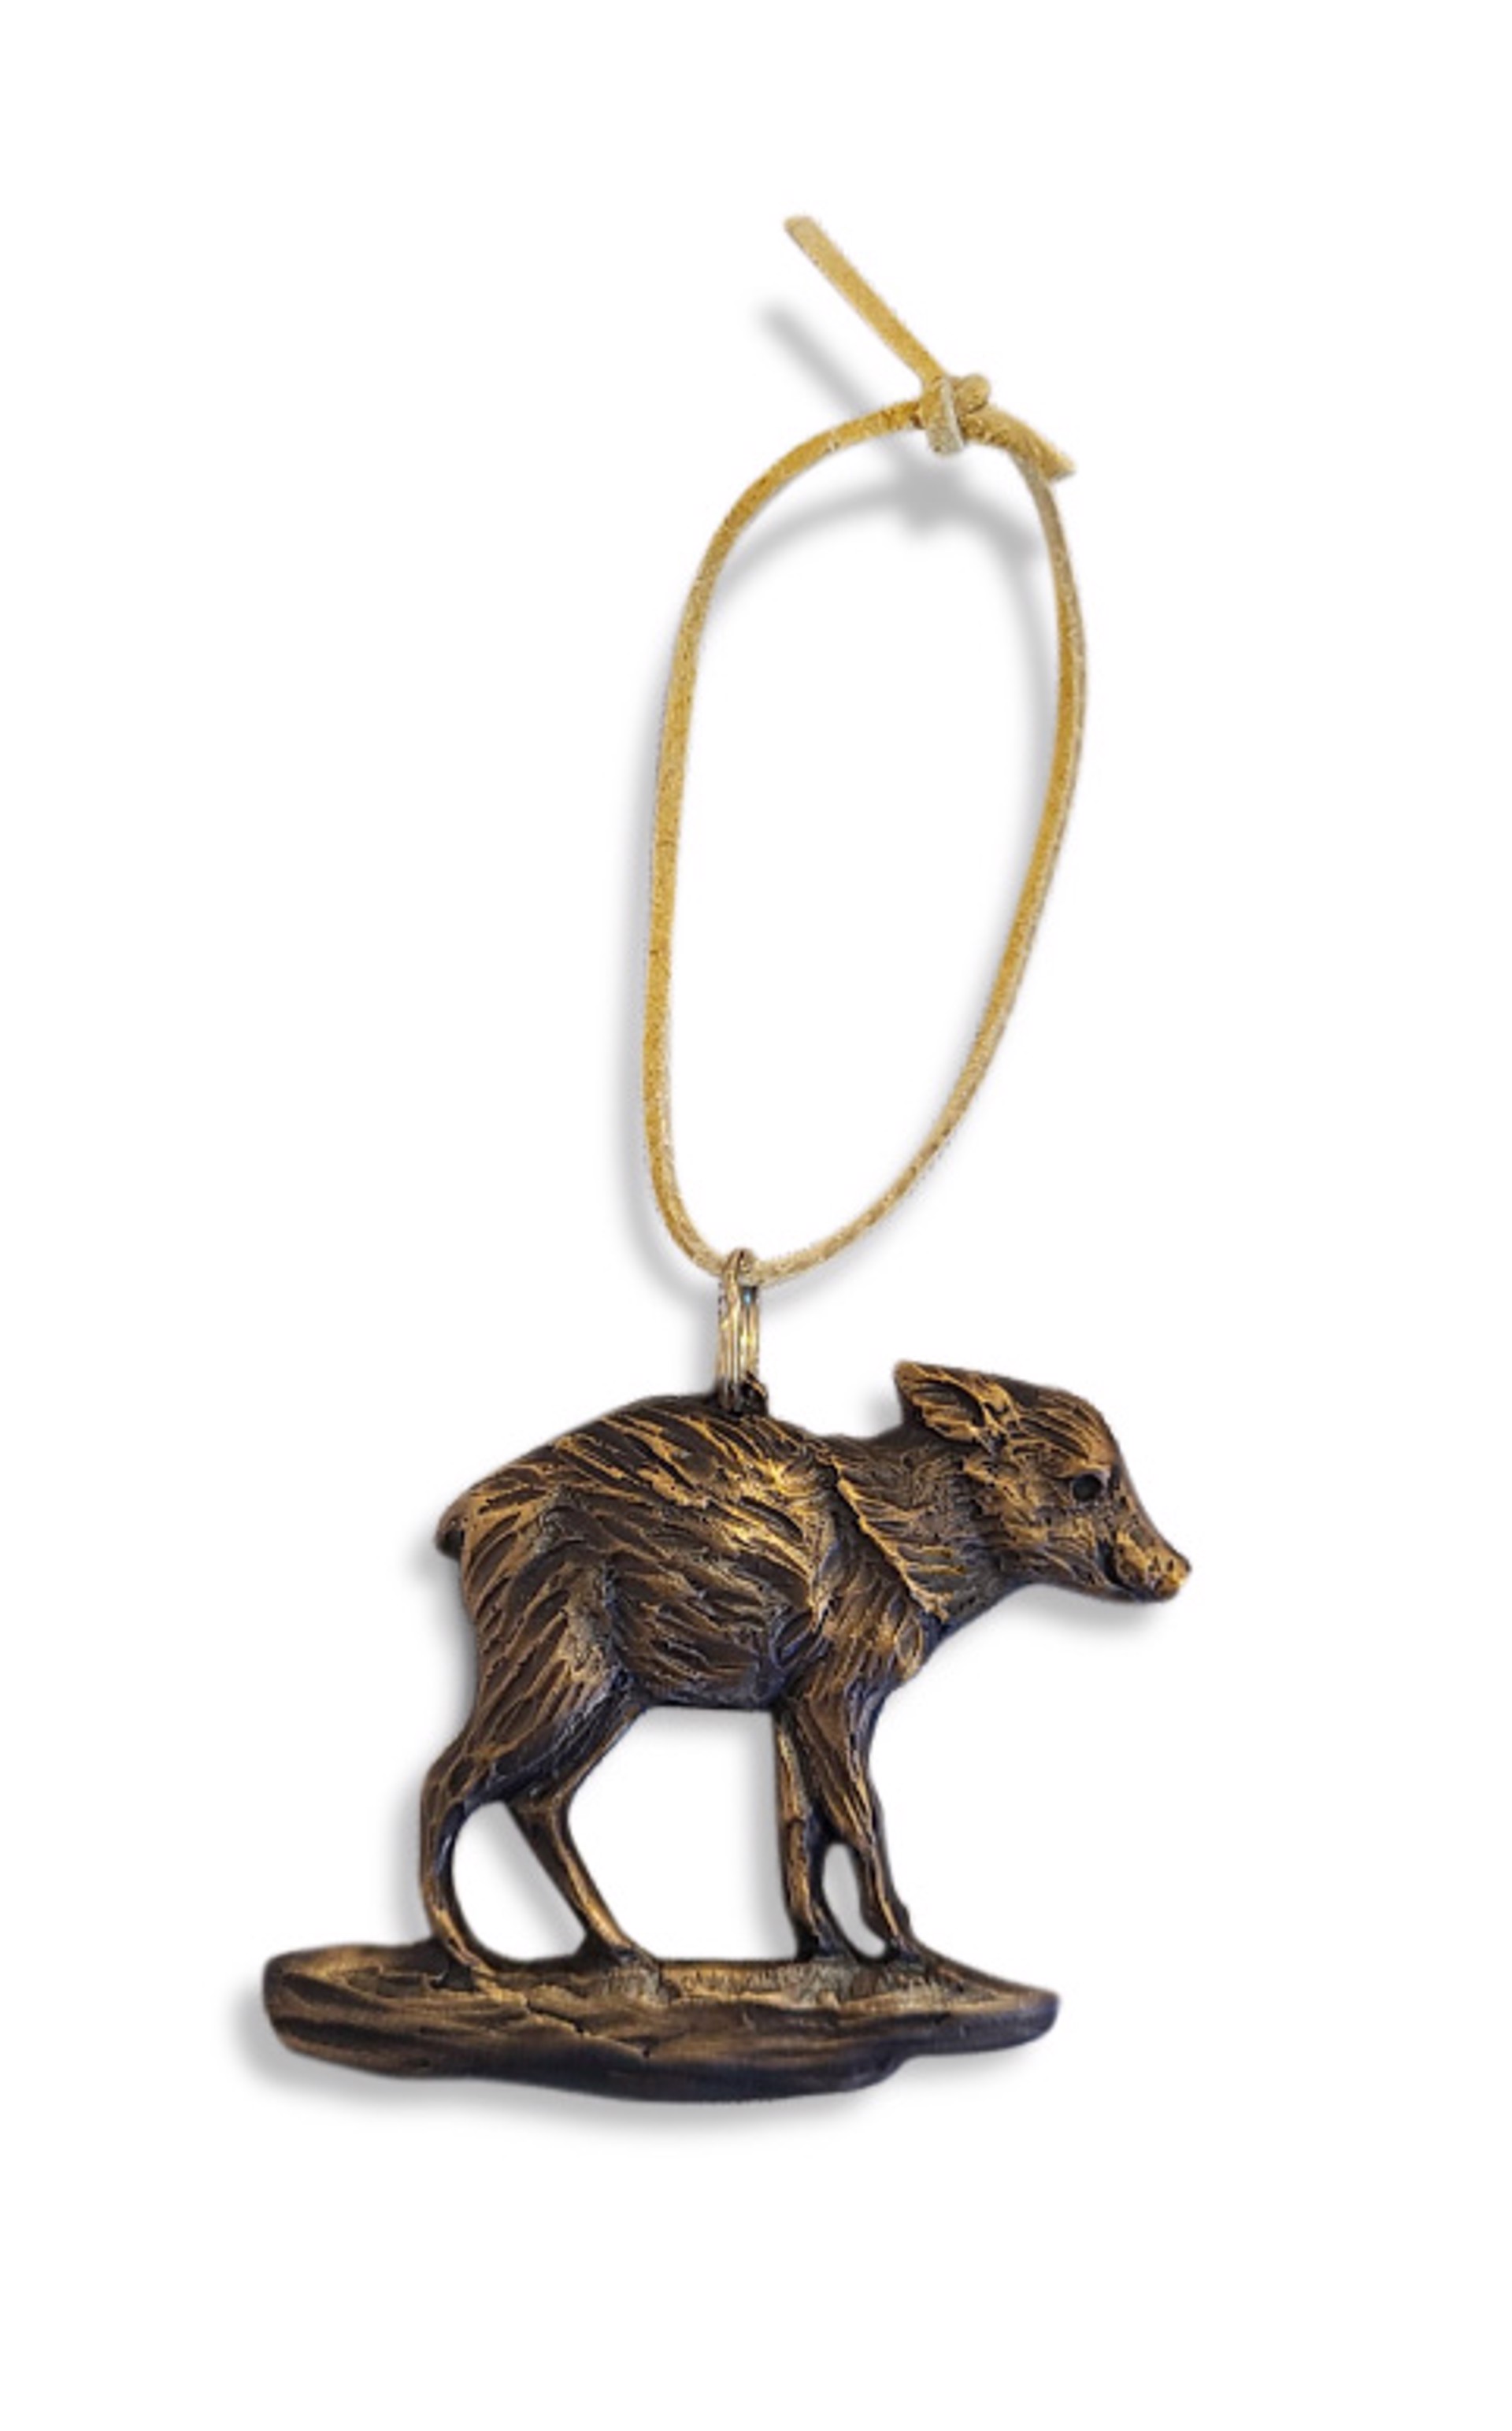 Javelina Ornament by Diana Simpson